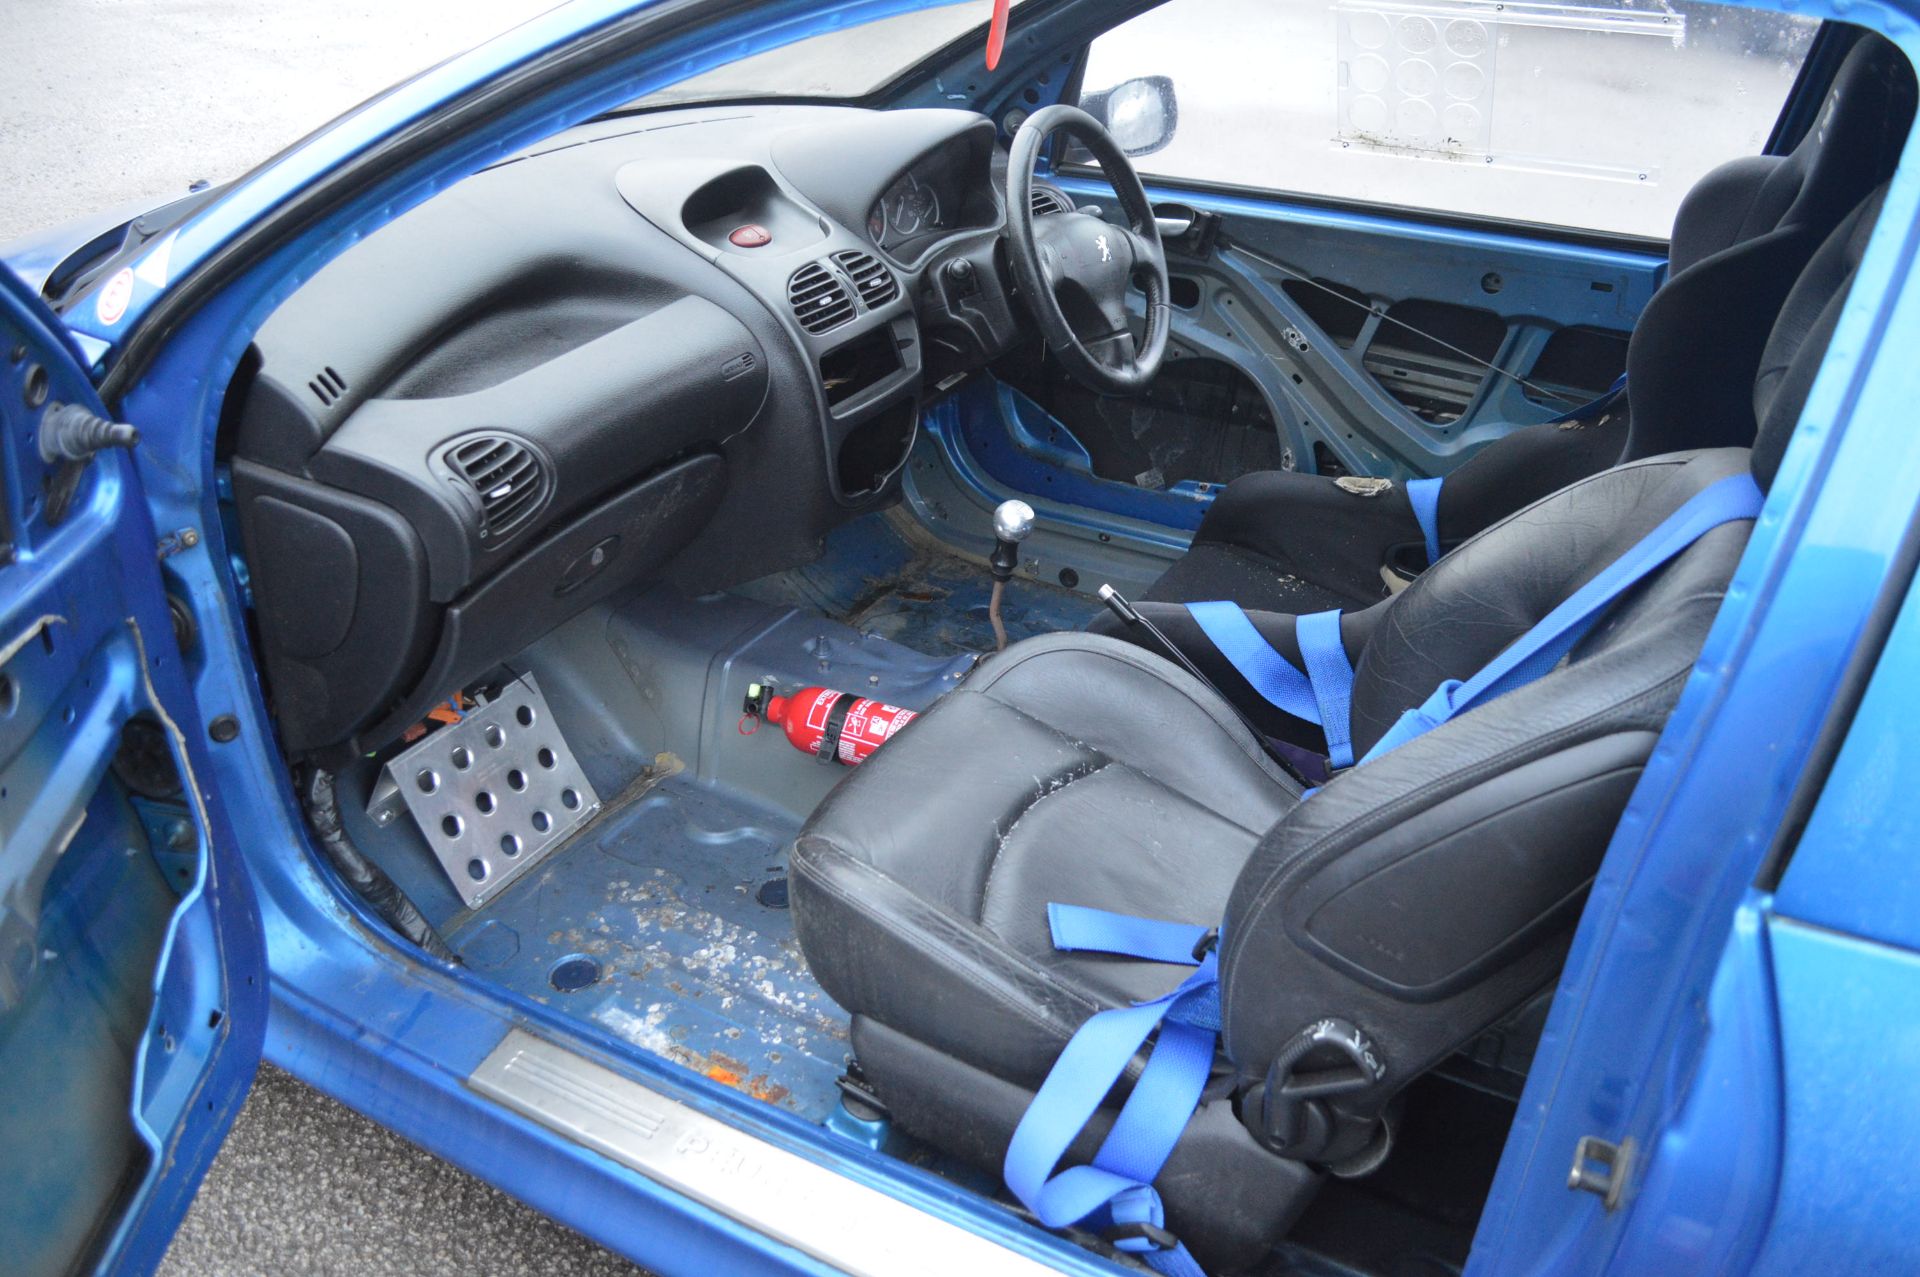 2003/03 REG PEUGEOT 206 GTI 180HP FAST TRACK DAY CAR  HAS THE 'VAN' PANELS FITTED INSTEAD OF REAR - Image 8 of 15